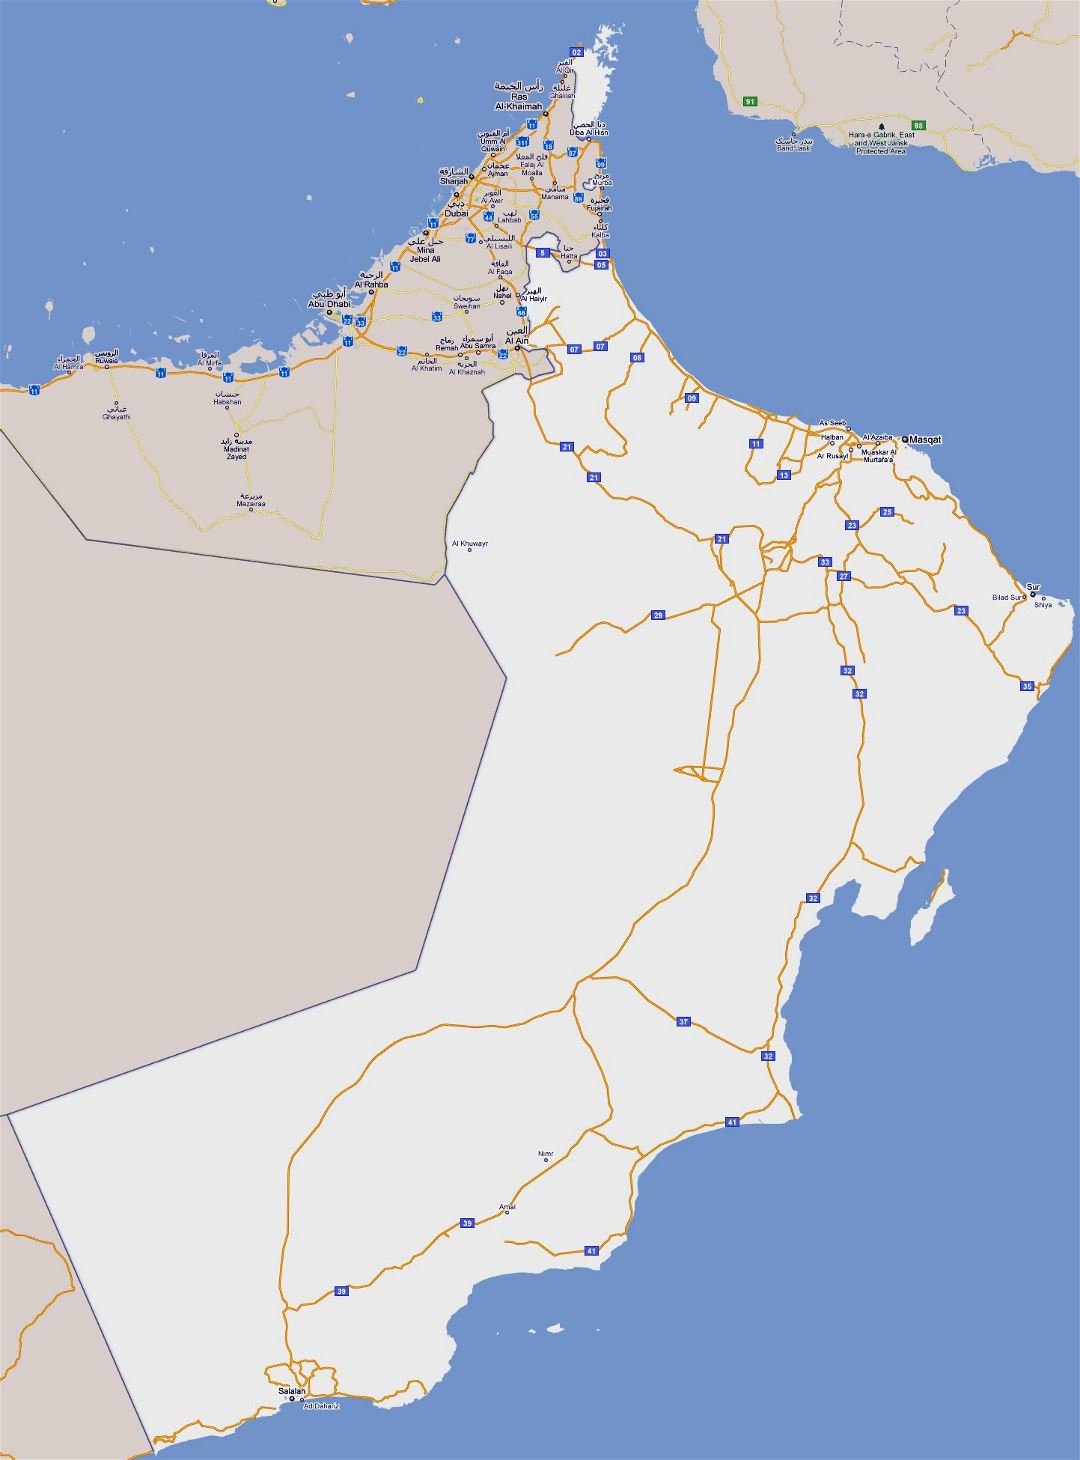 Large road map of Oman with cities